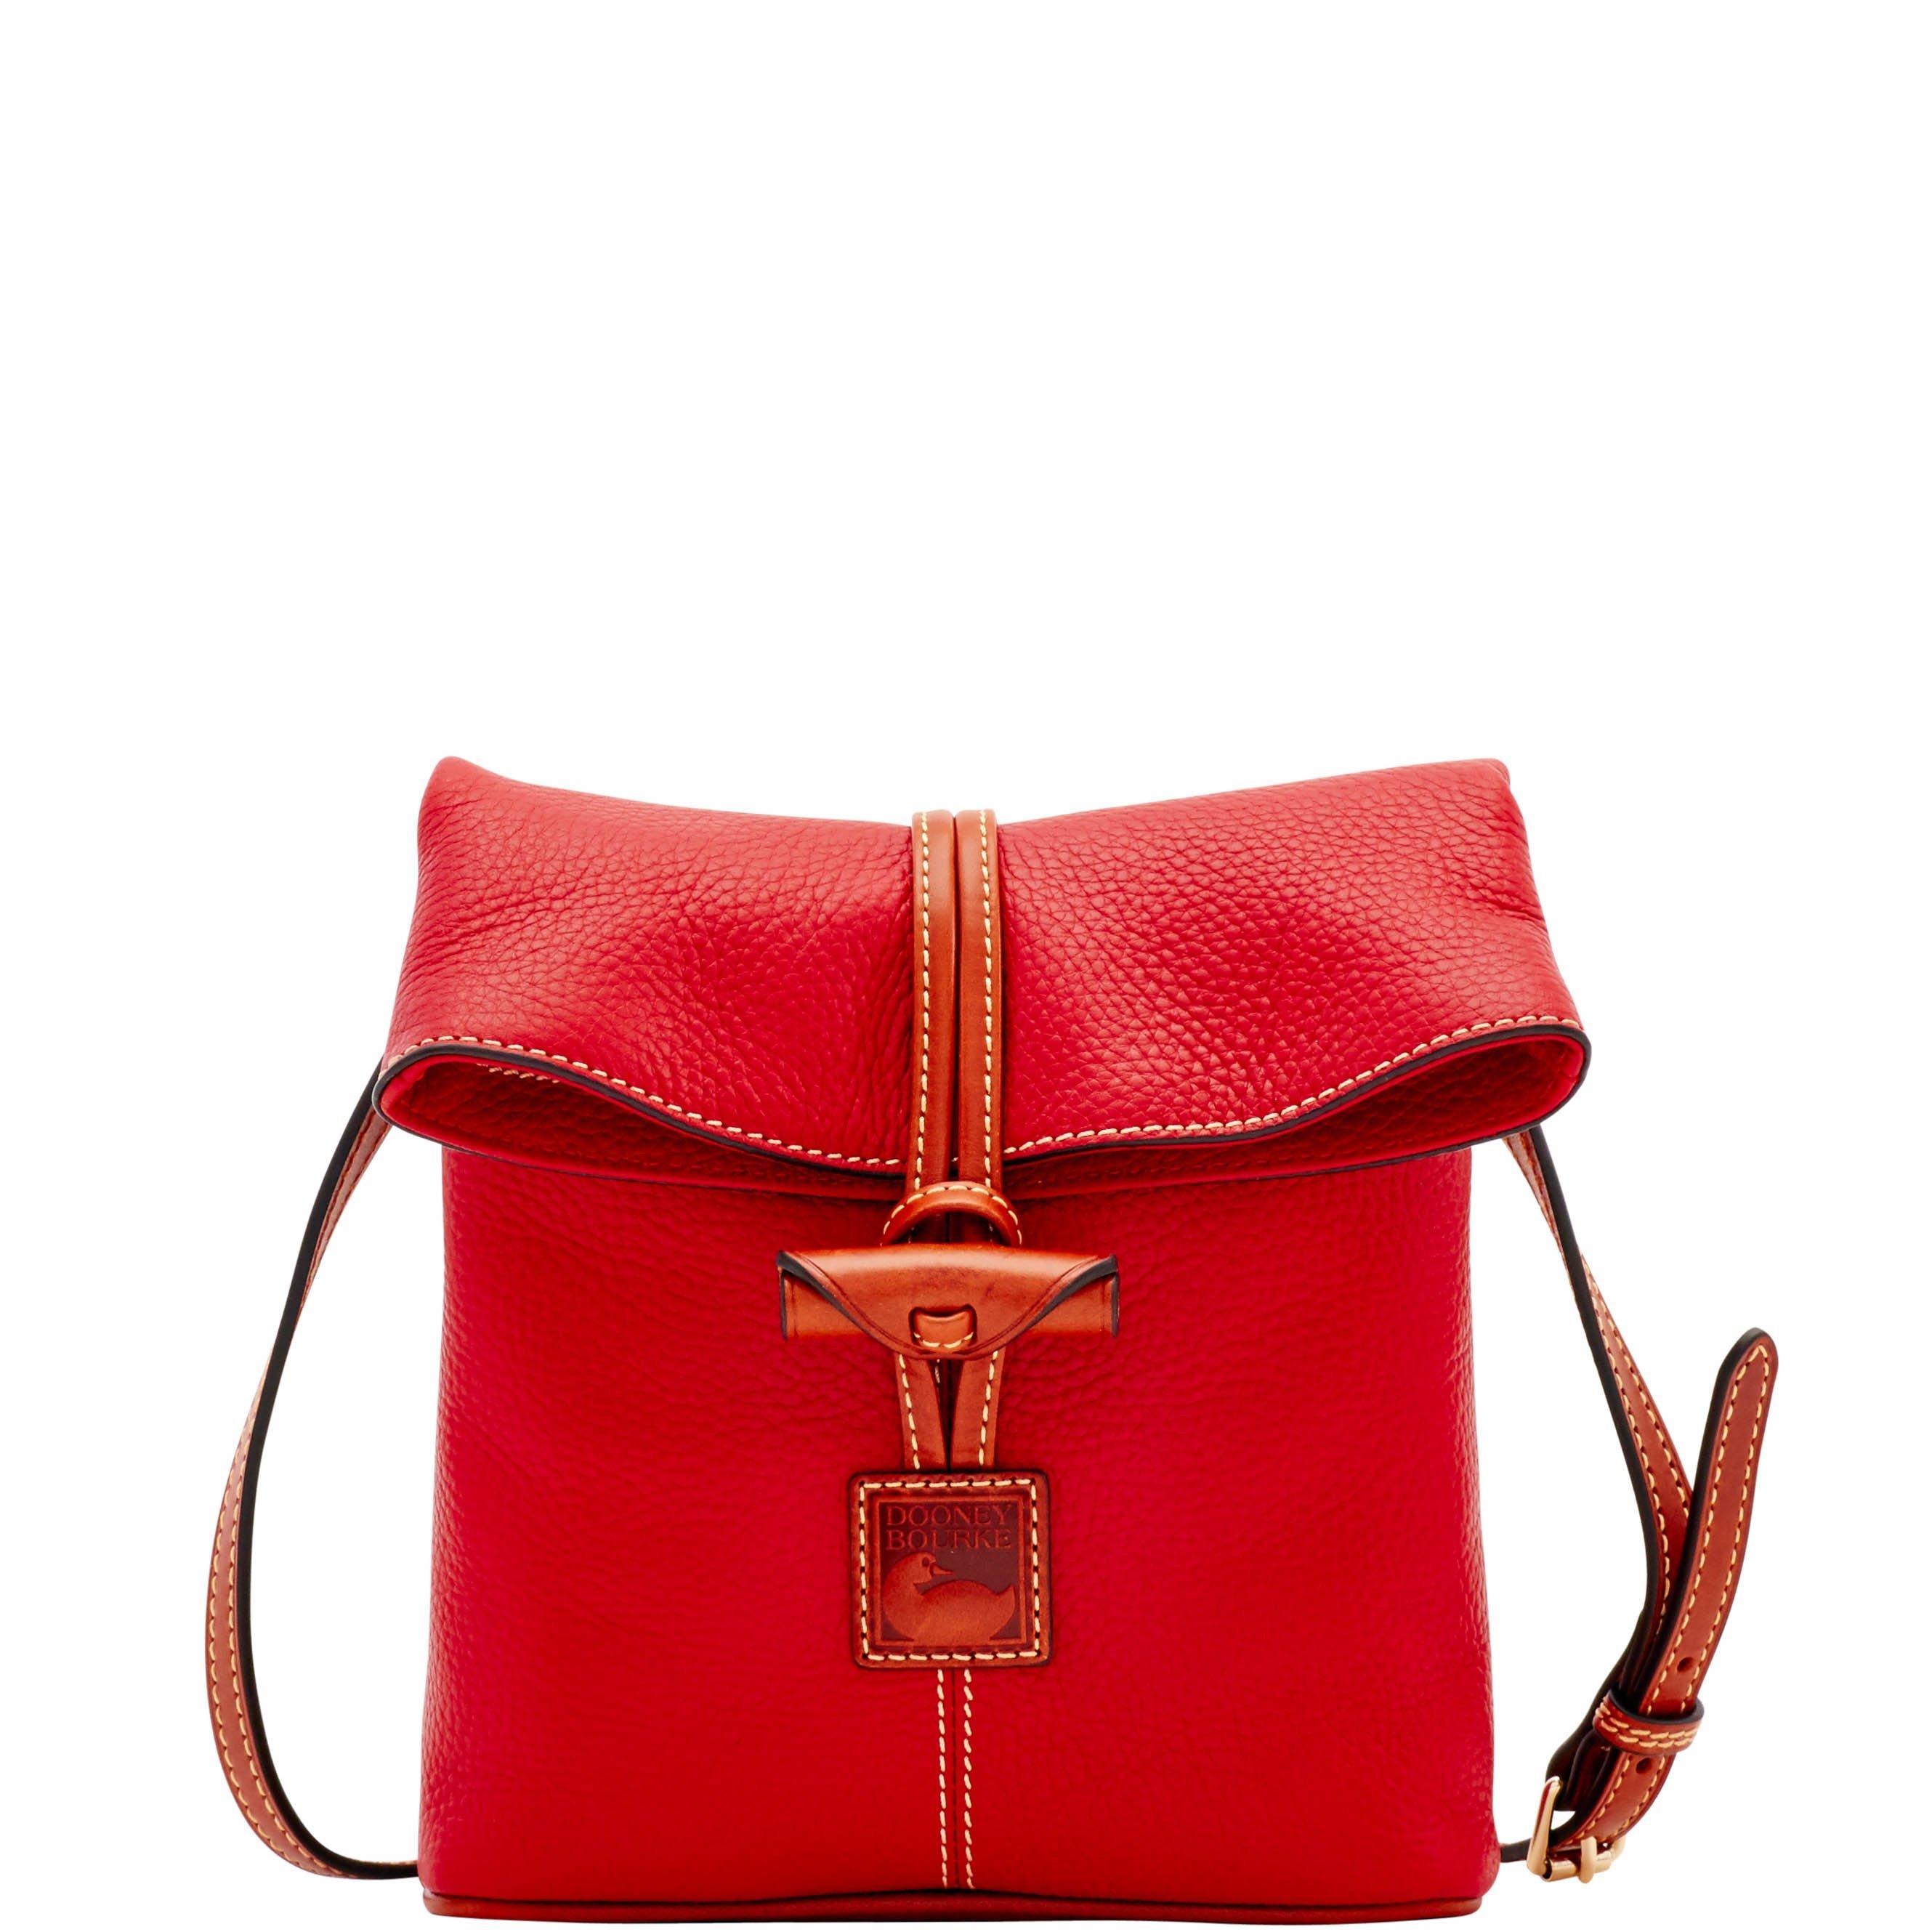 Dooney & Bourke Pebble Grain Toggle Crossbody in Red - Save 25% - Lyst